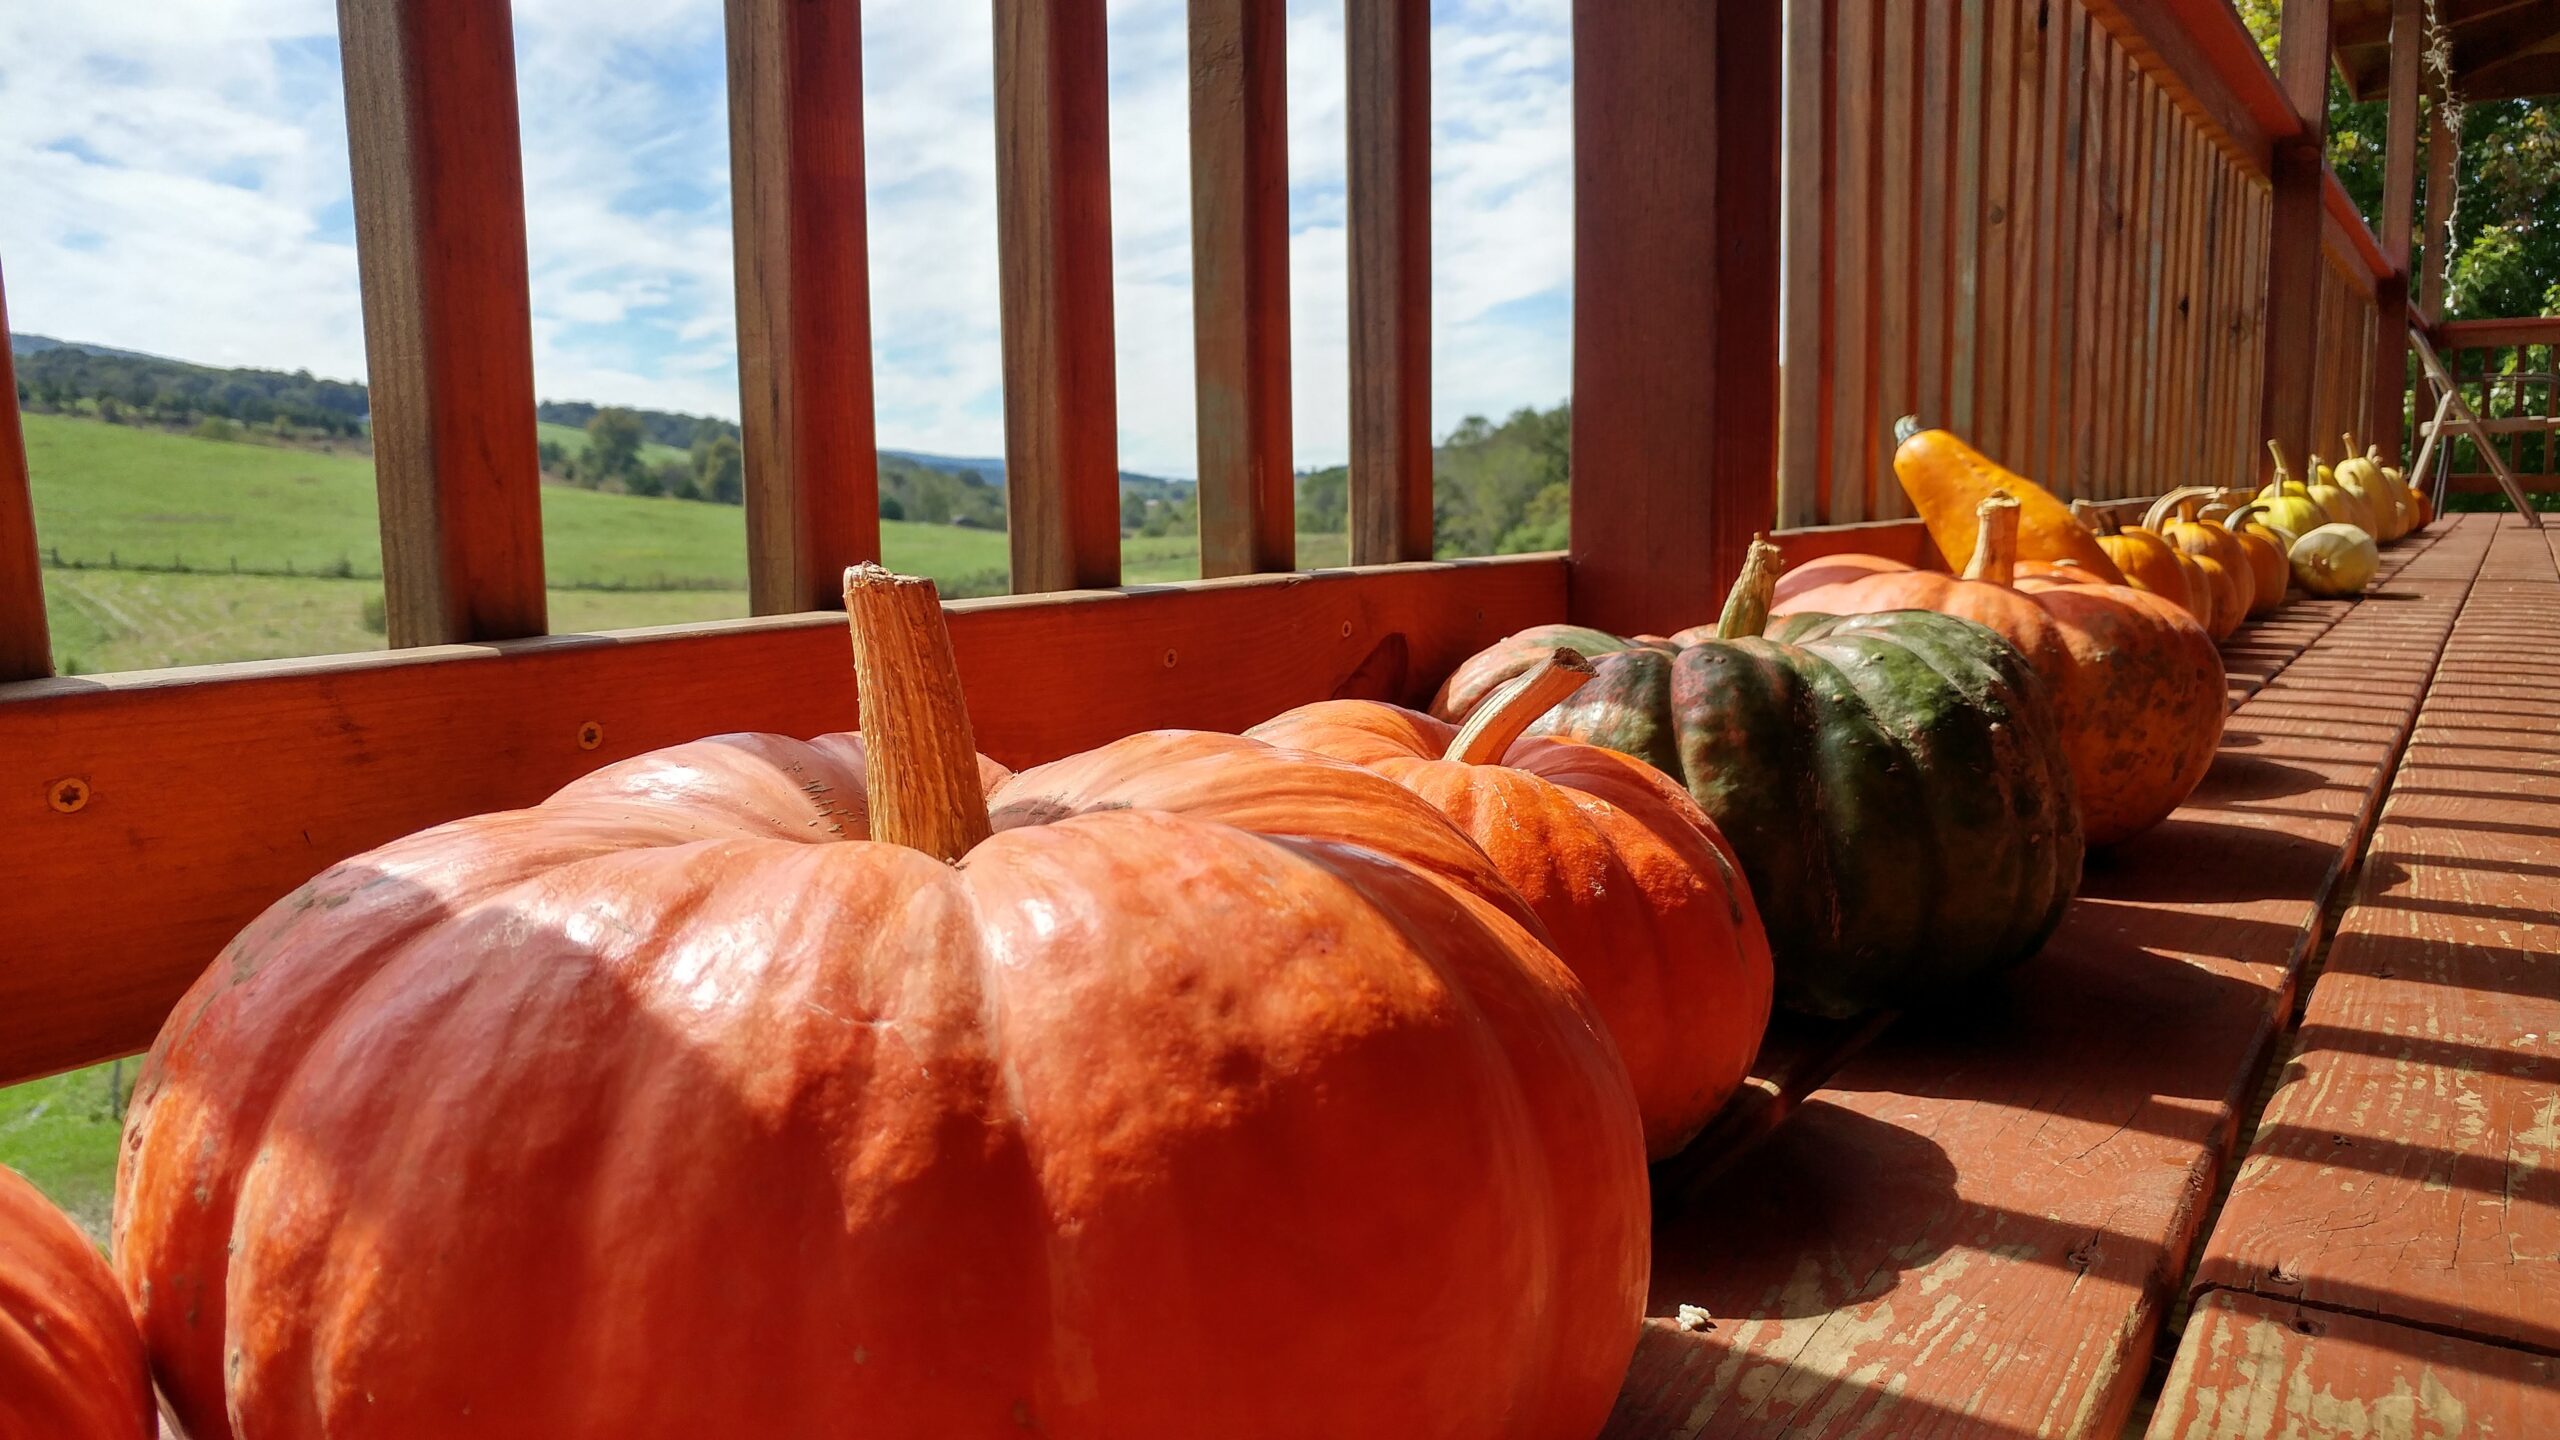 Heirloom Pumpkins lined up around the porch.